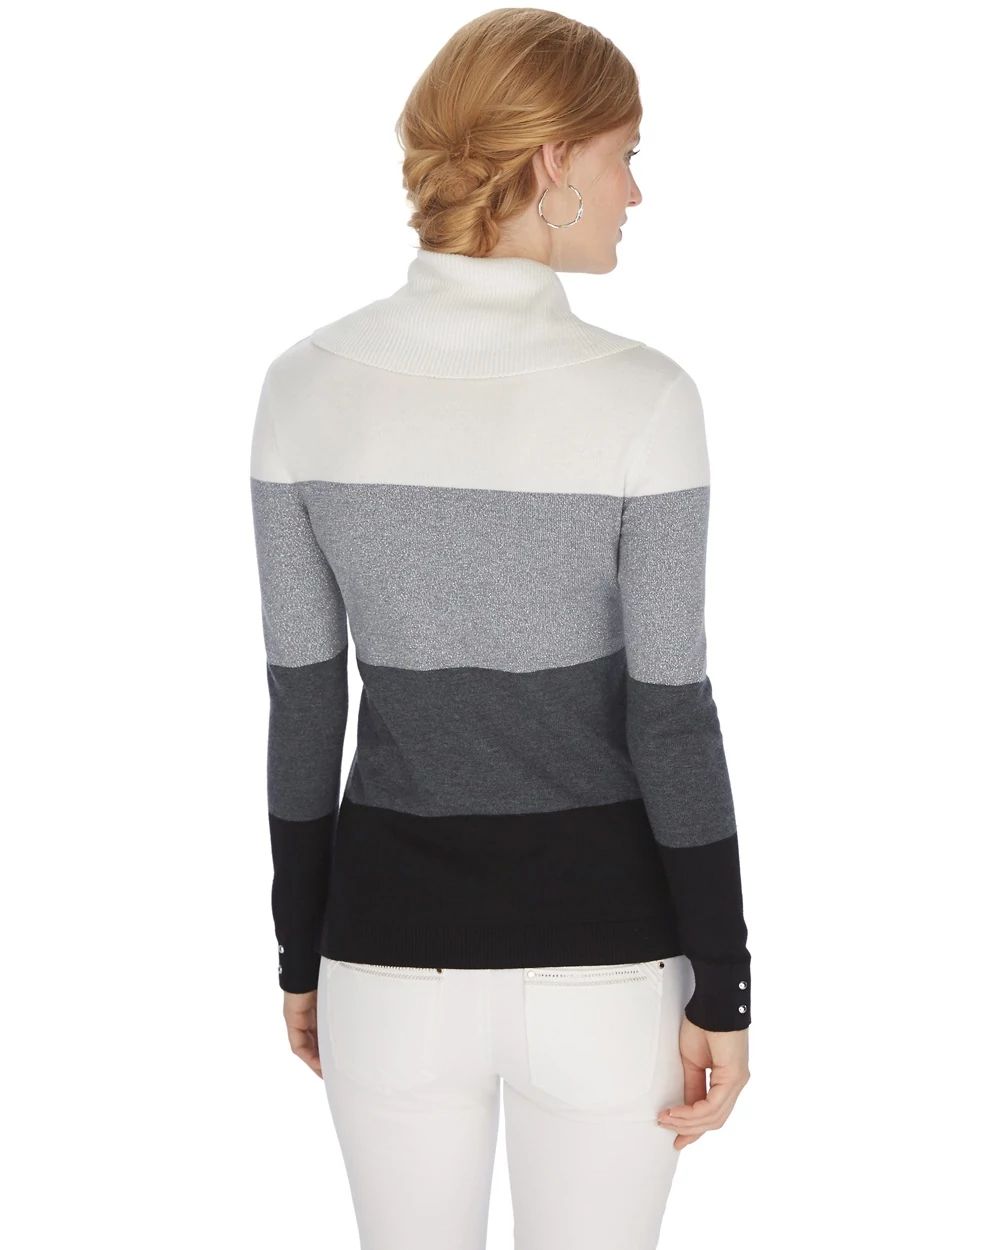 Long Sleeve Colorblock Stripe Pullover click to view larger image.